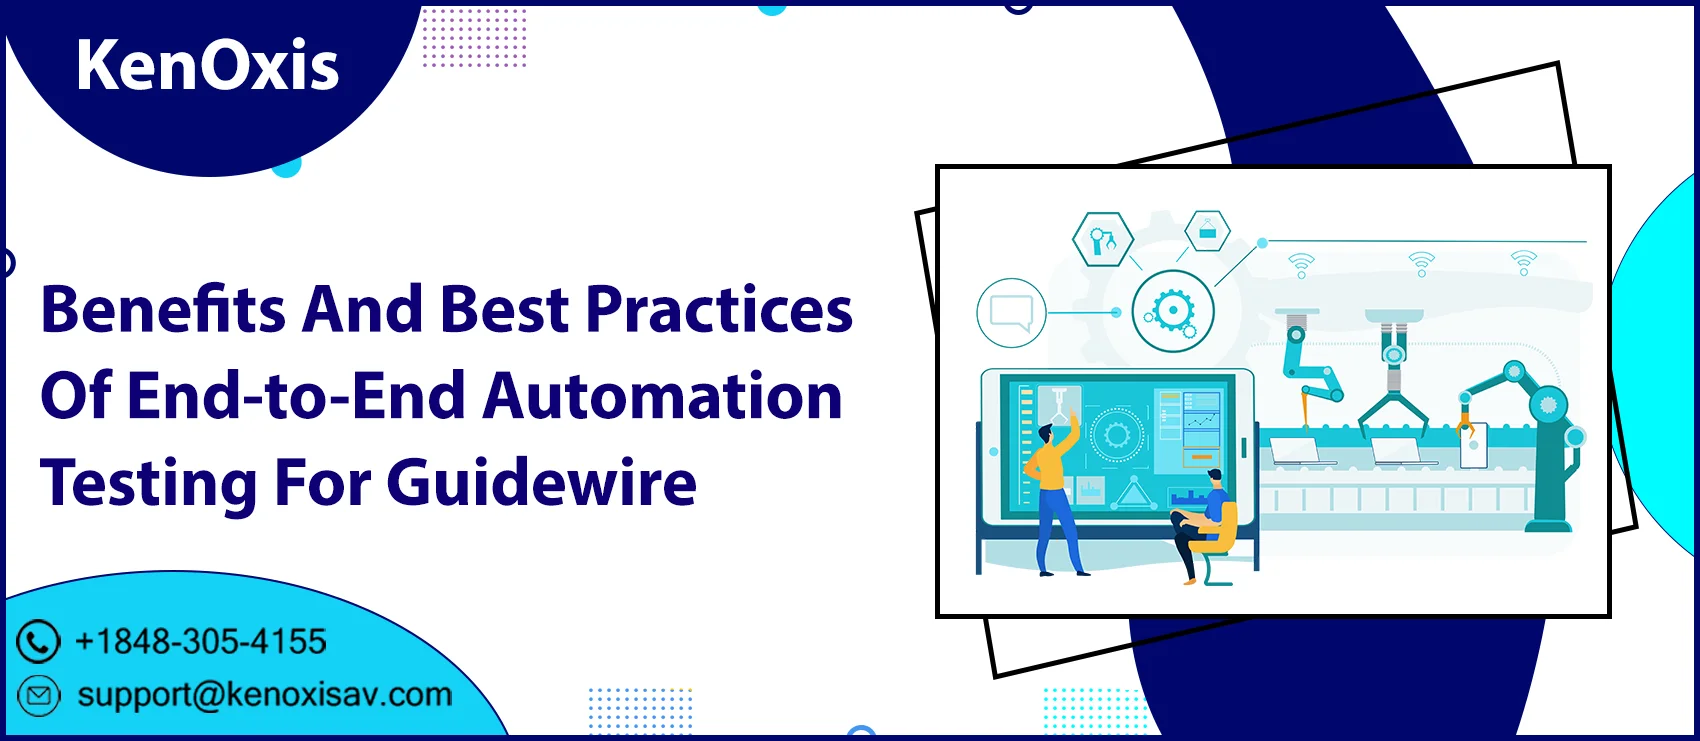 Benefits And Best Practices Of End-to-End Automation Testing For Guidewire